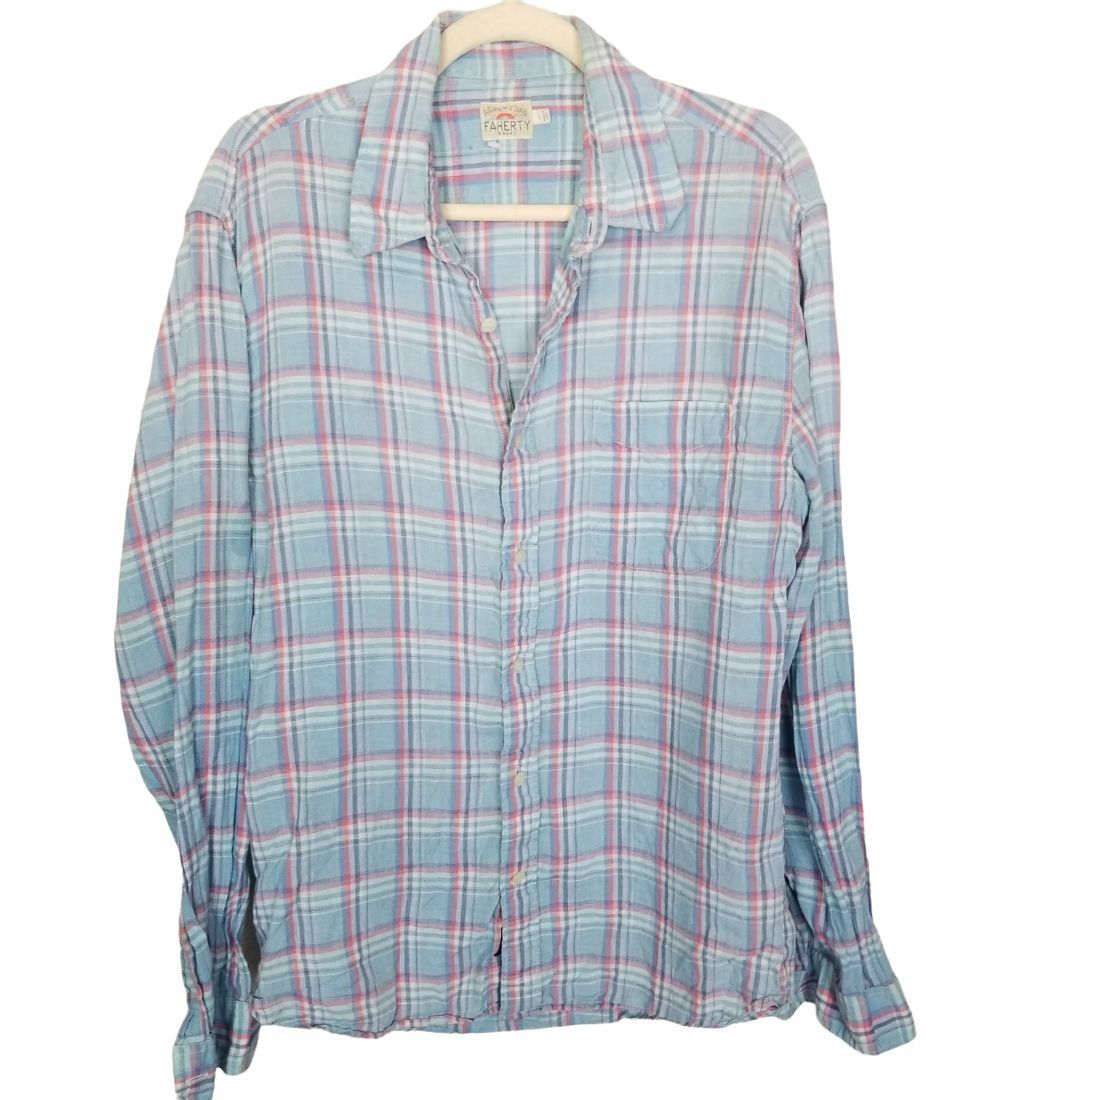 Faherty Faherty L Plaid Long Sleeves Button Up Linen Shirt | Grailed